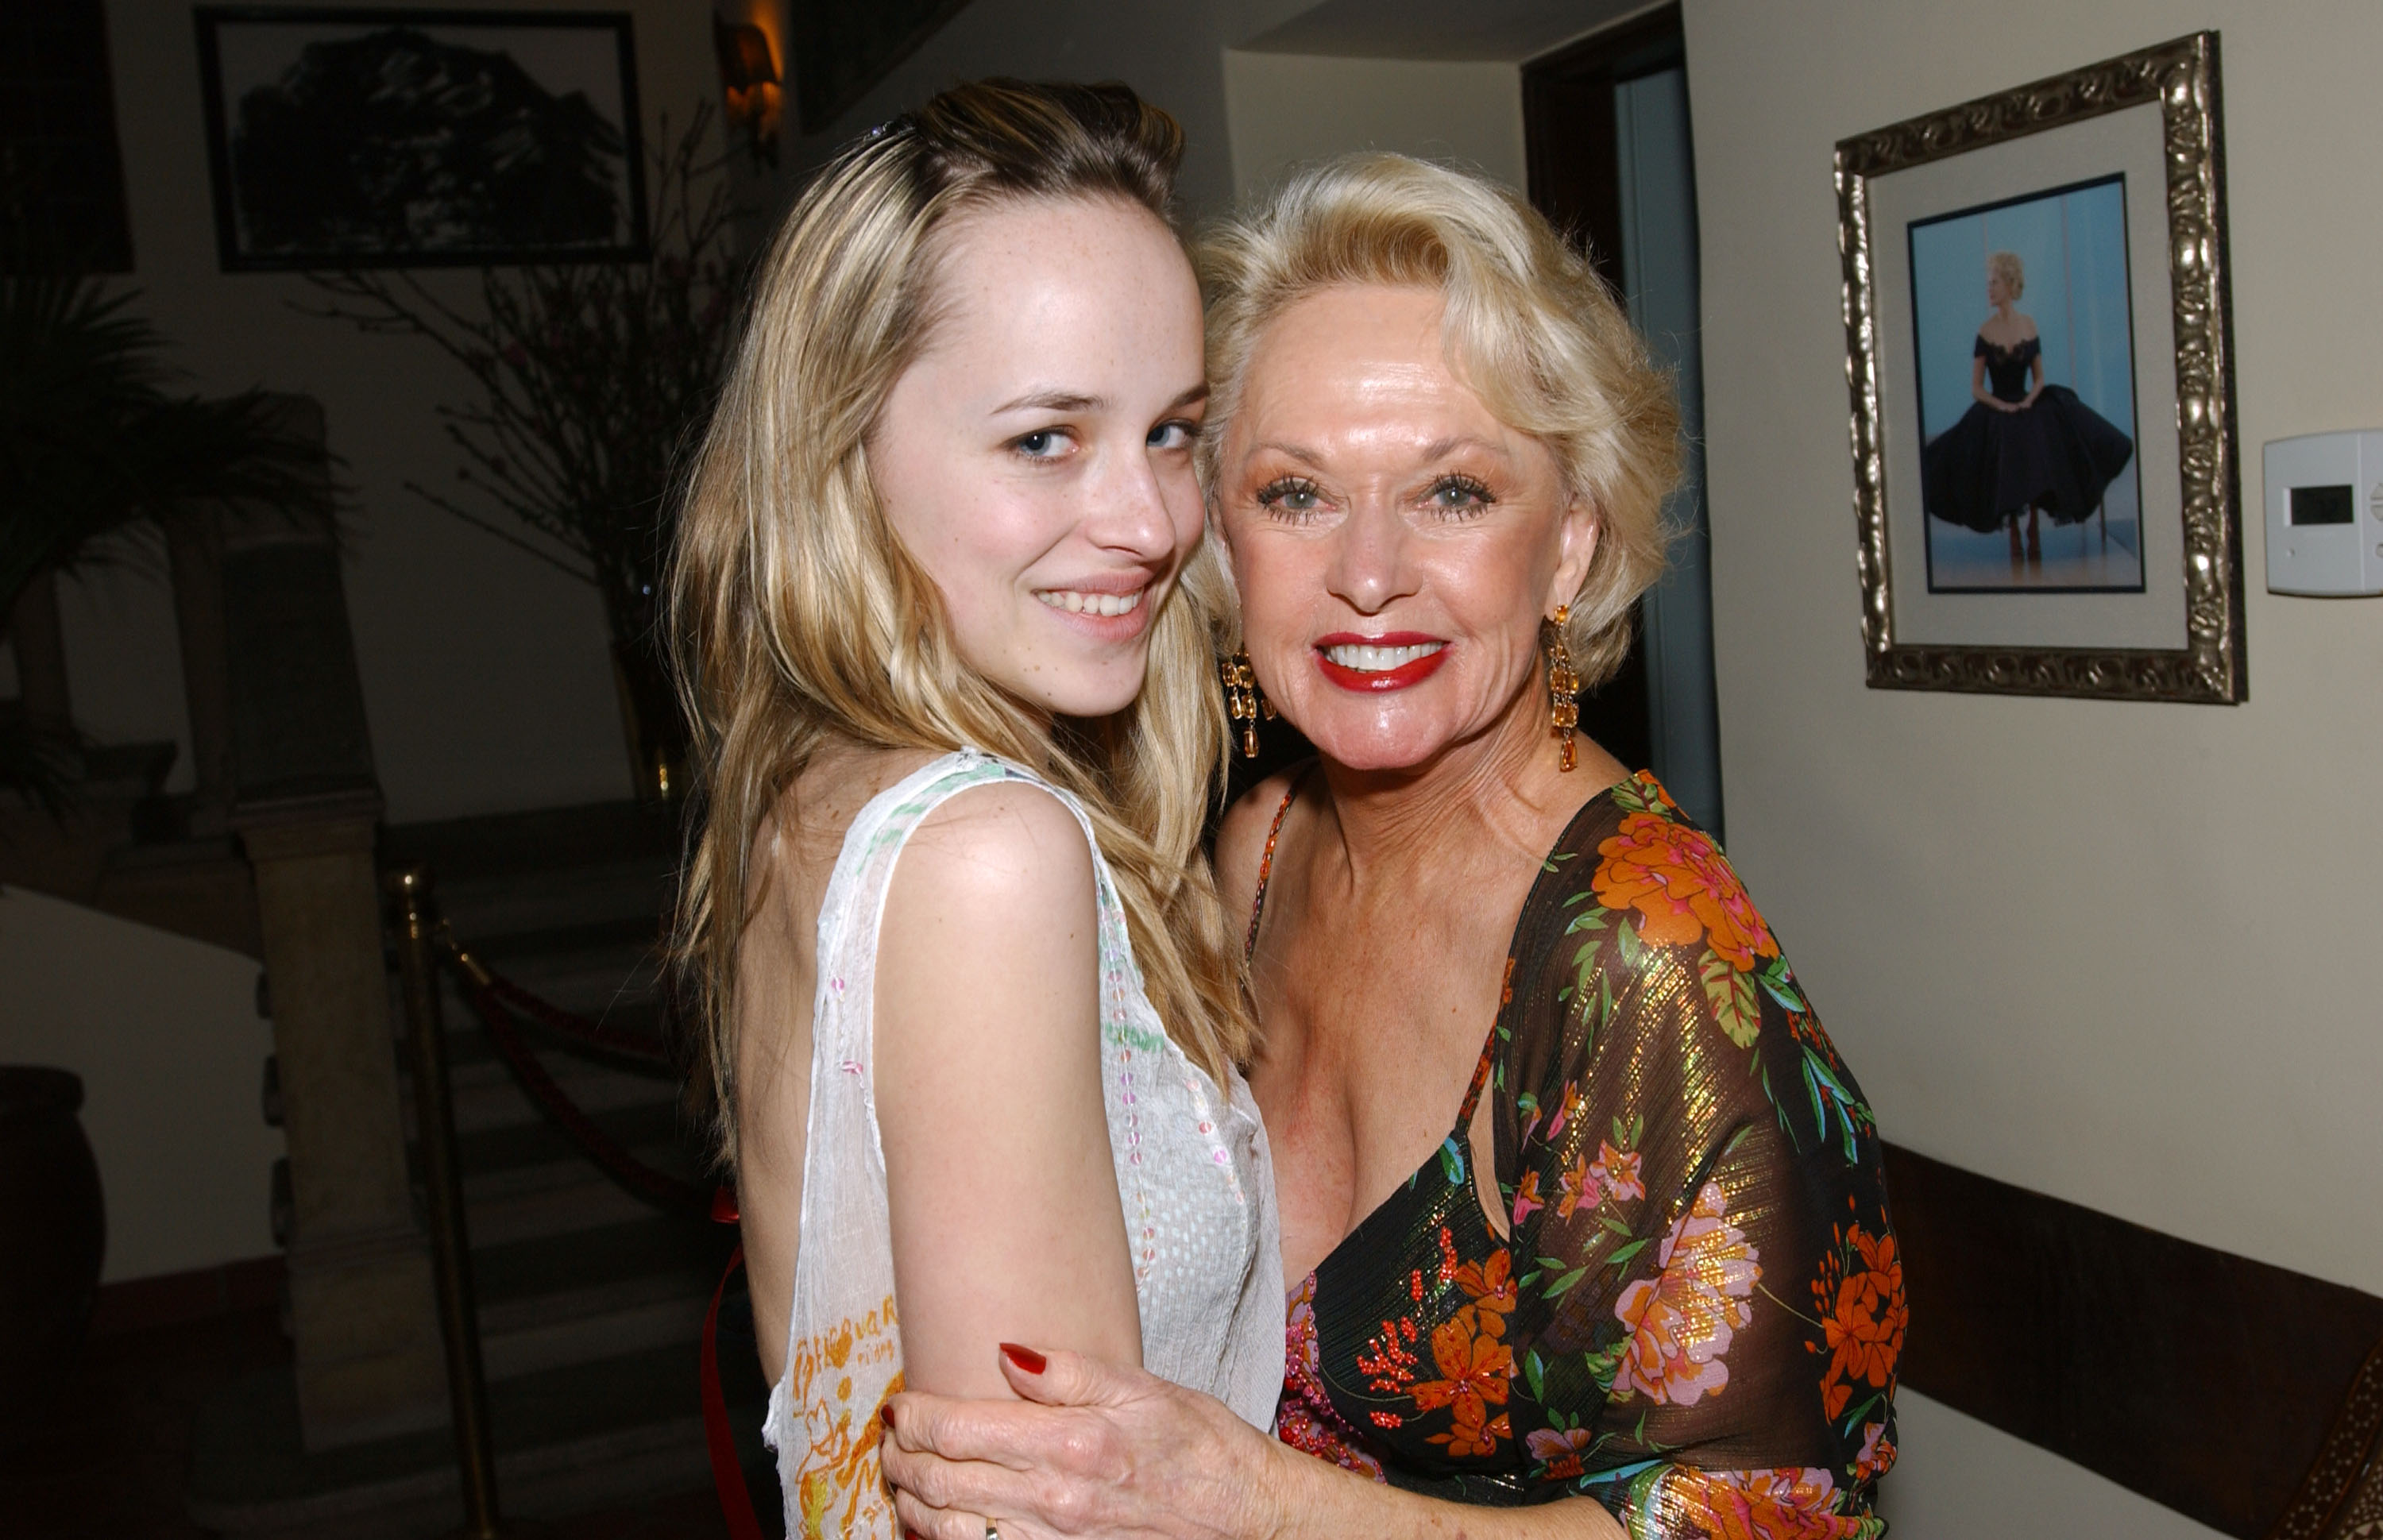 Dakota Johnson and Tippi Hedren at Tippi Hedren's 75th Birthday Gala at the Private Residence in Los Angeles, California | Source: Getty Images